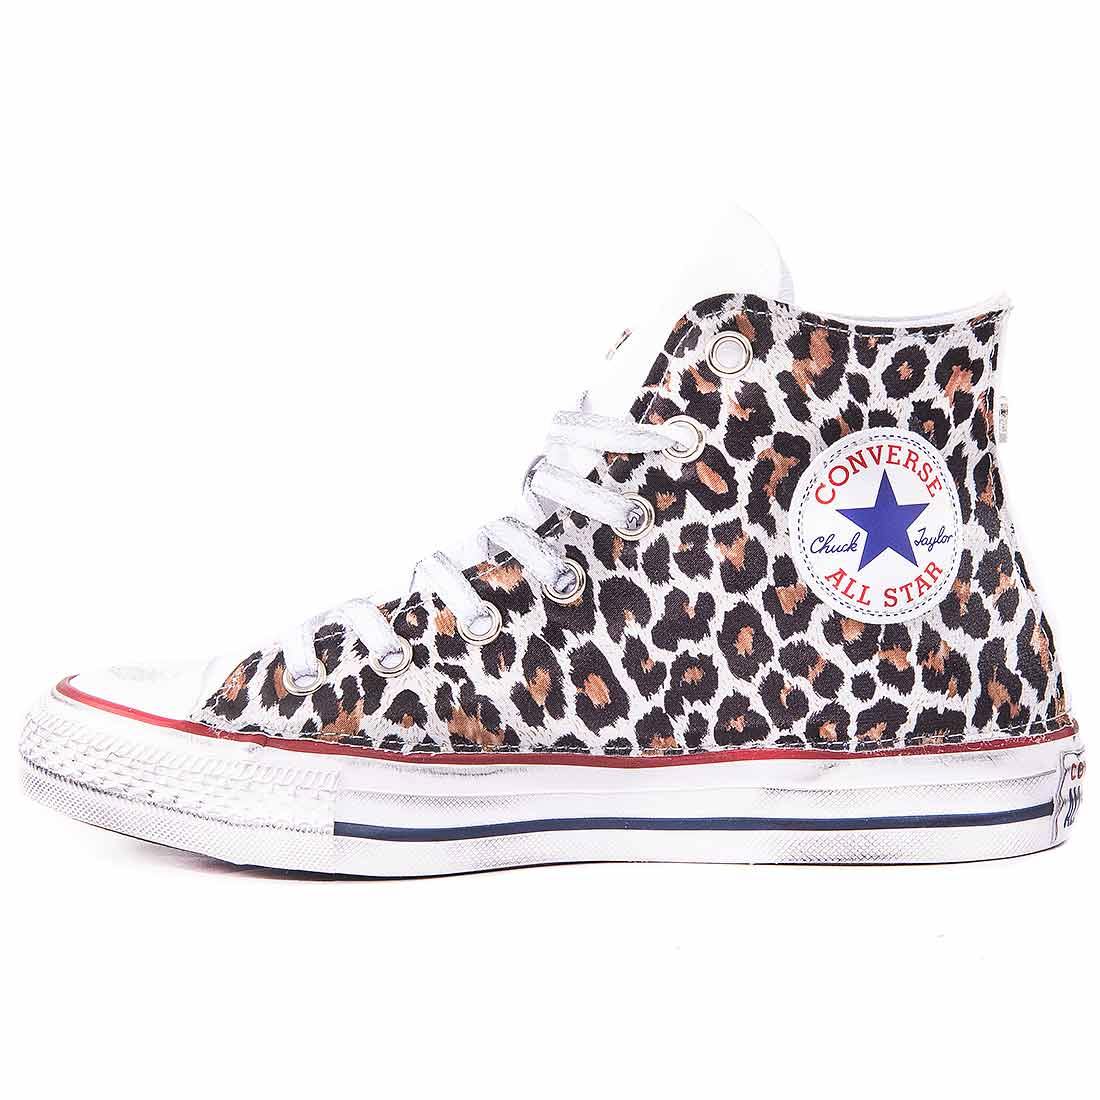 Converse-Personalizzate-Leopardate-All-Star-Alte-Animalier-Maculate-Racoon-LAB